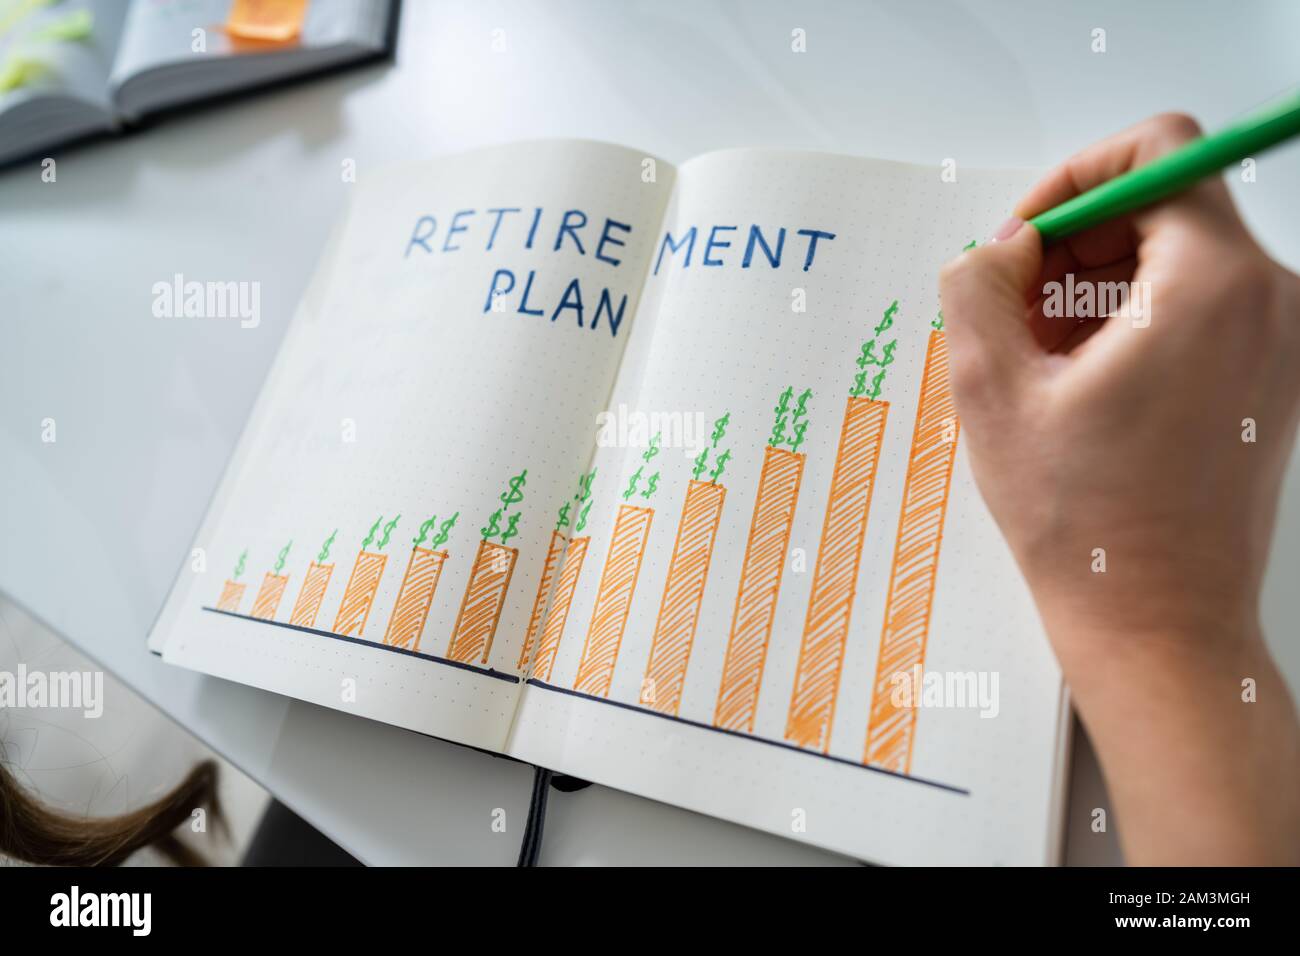 Elevated View Of A Human Hand Drawing Retirement Plan Growth Concept On Notebook Stock Photo